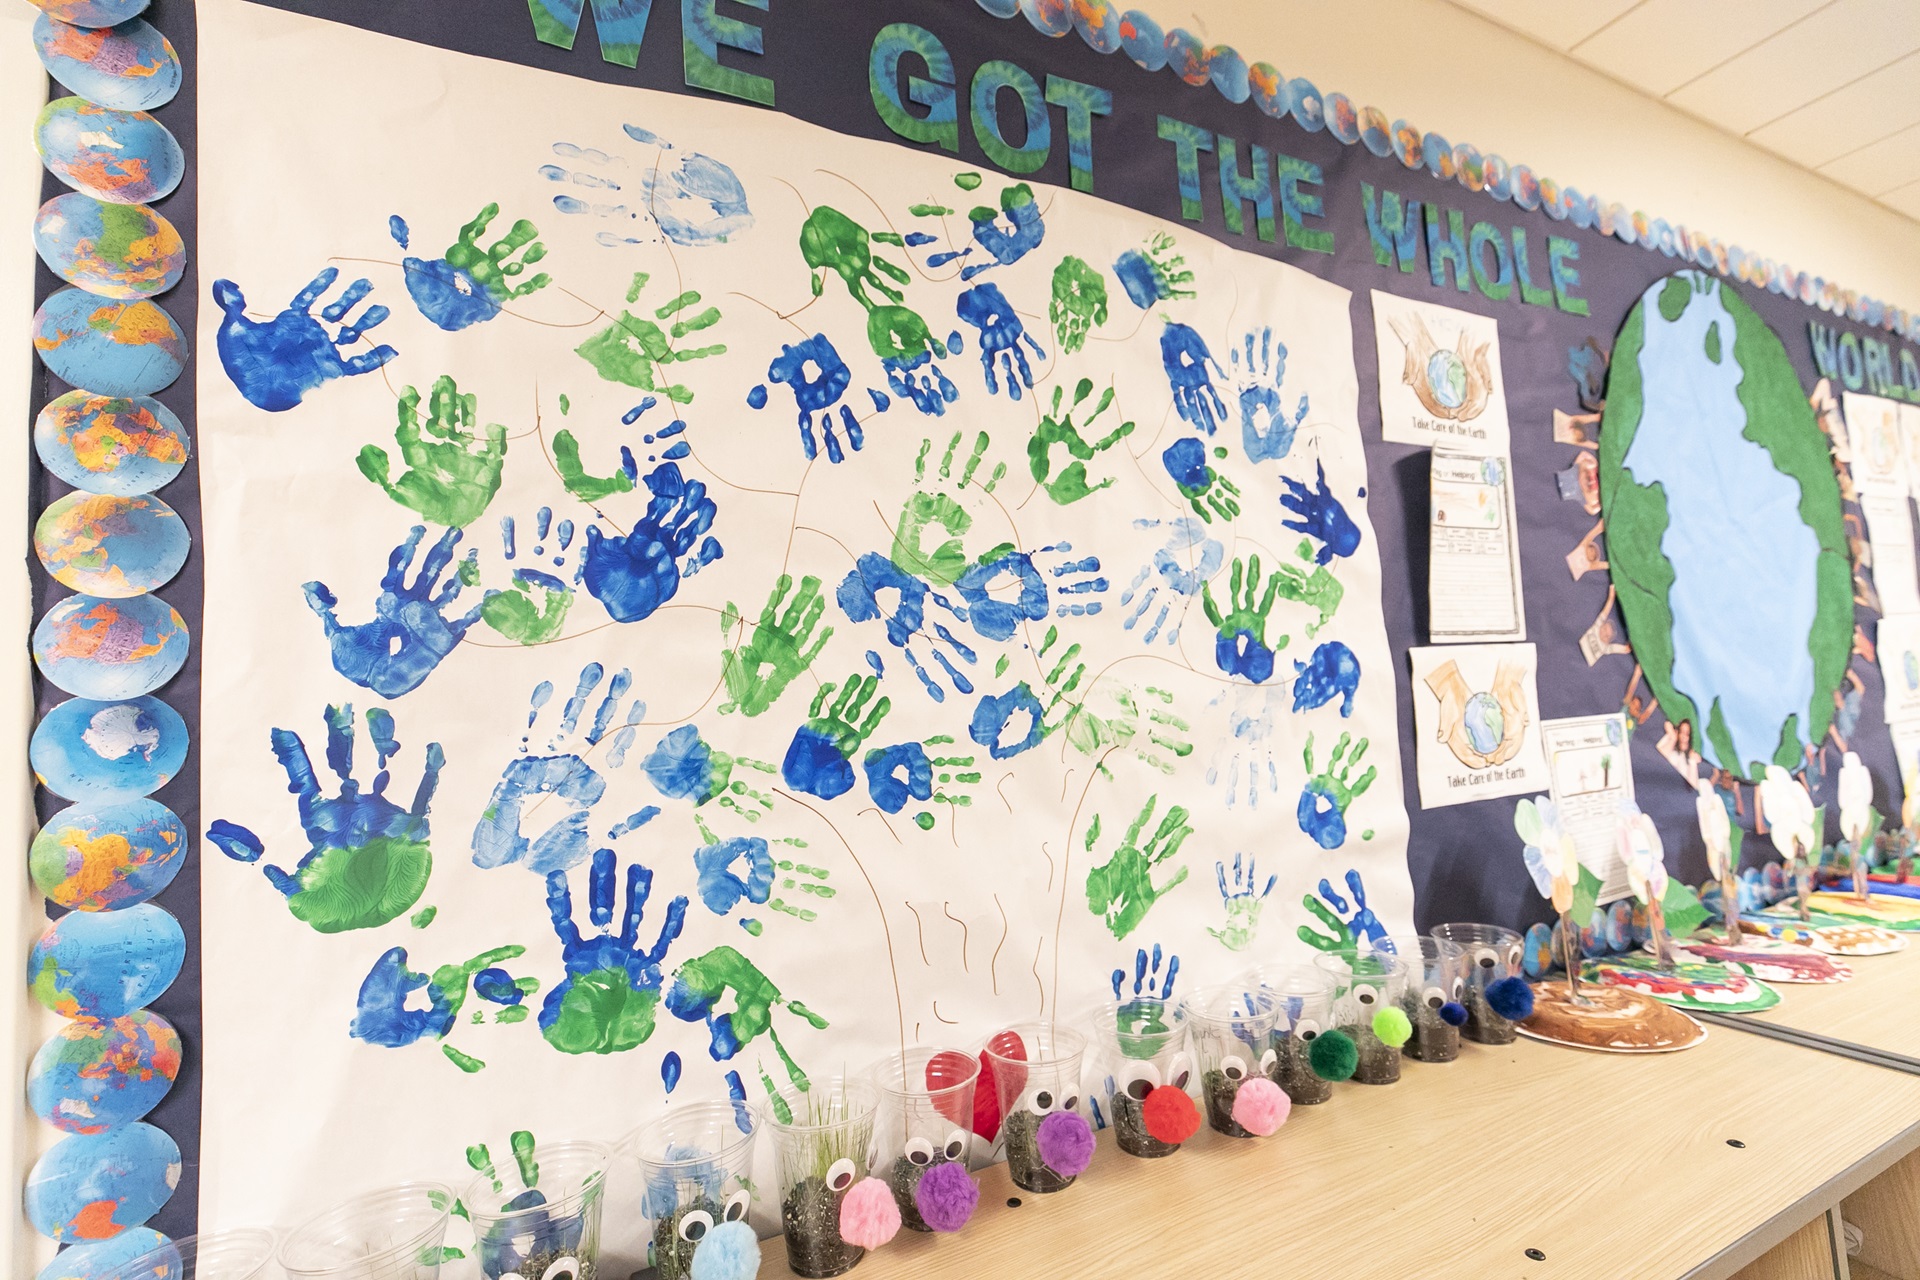 Elementary school classroom decorated with hand prints and crafts